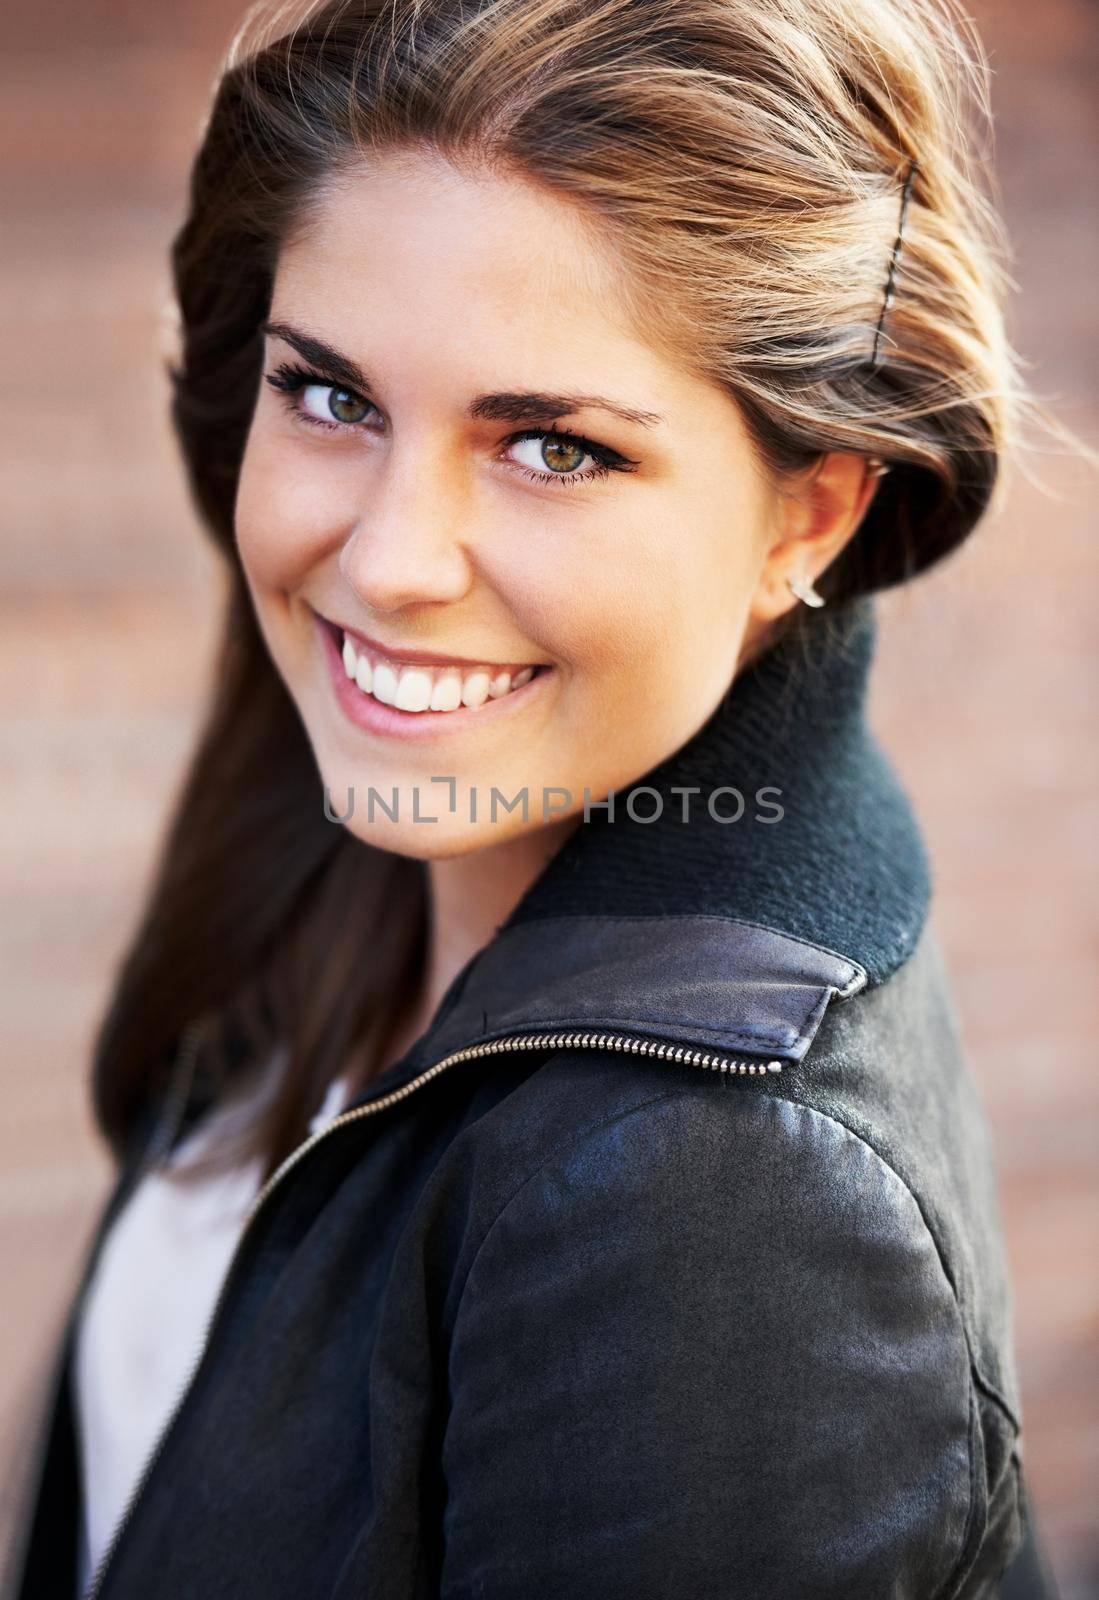 Portrait of an attractive young woman outdoors in the city.